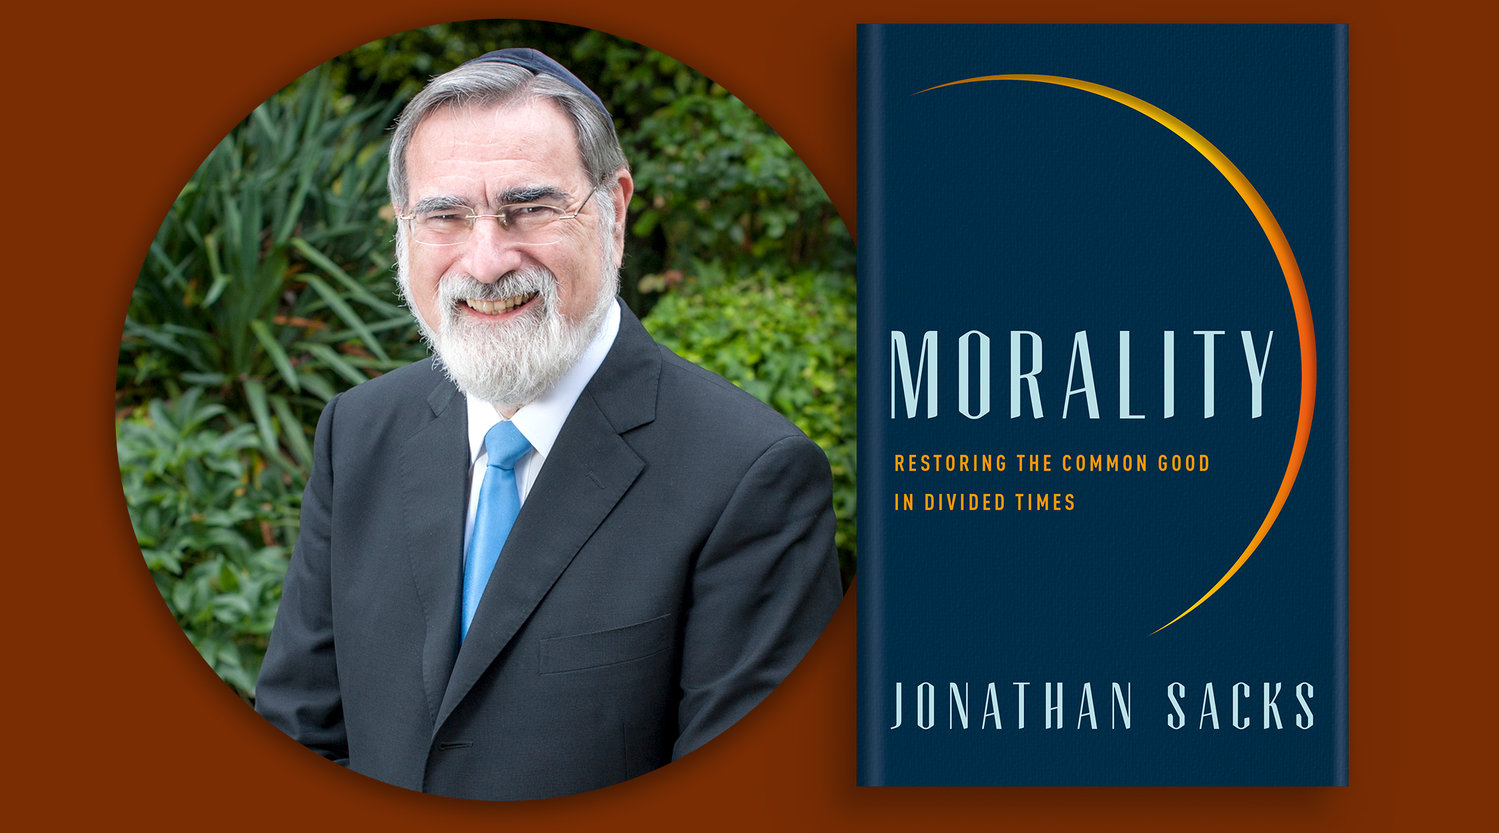 Sir Chief Lord Rabbi Jonathan Sacks and his book "Morality", available September 1 in the United States